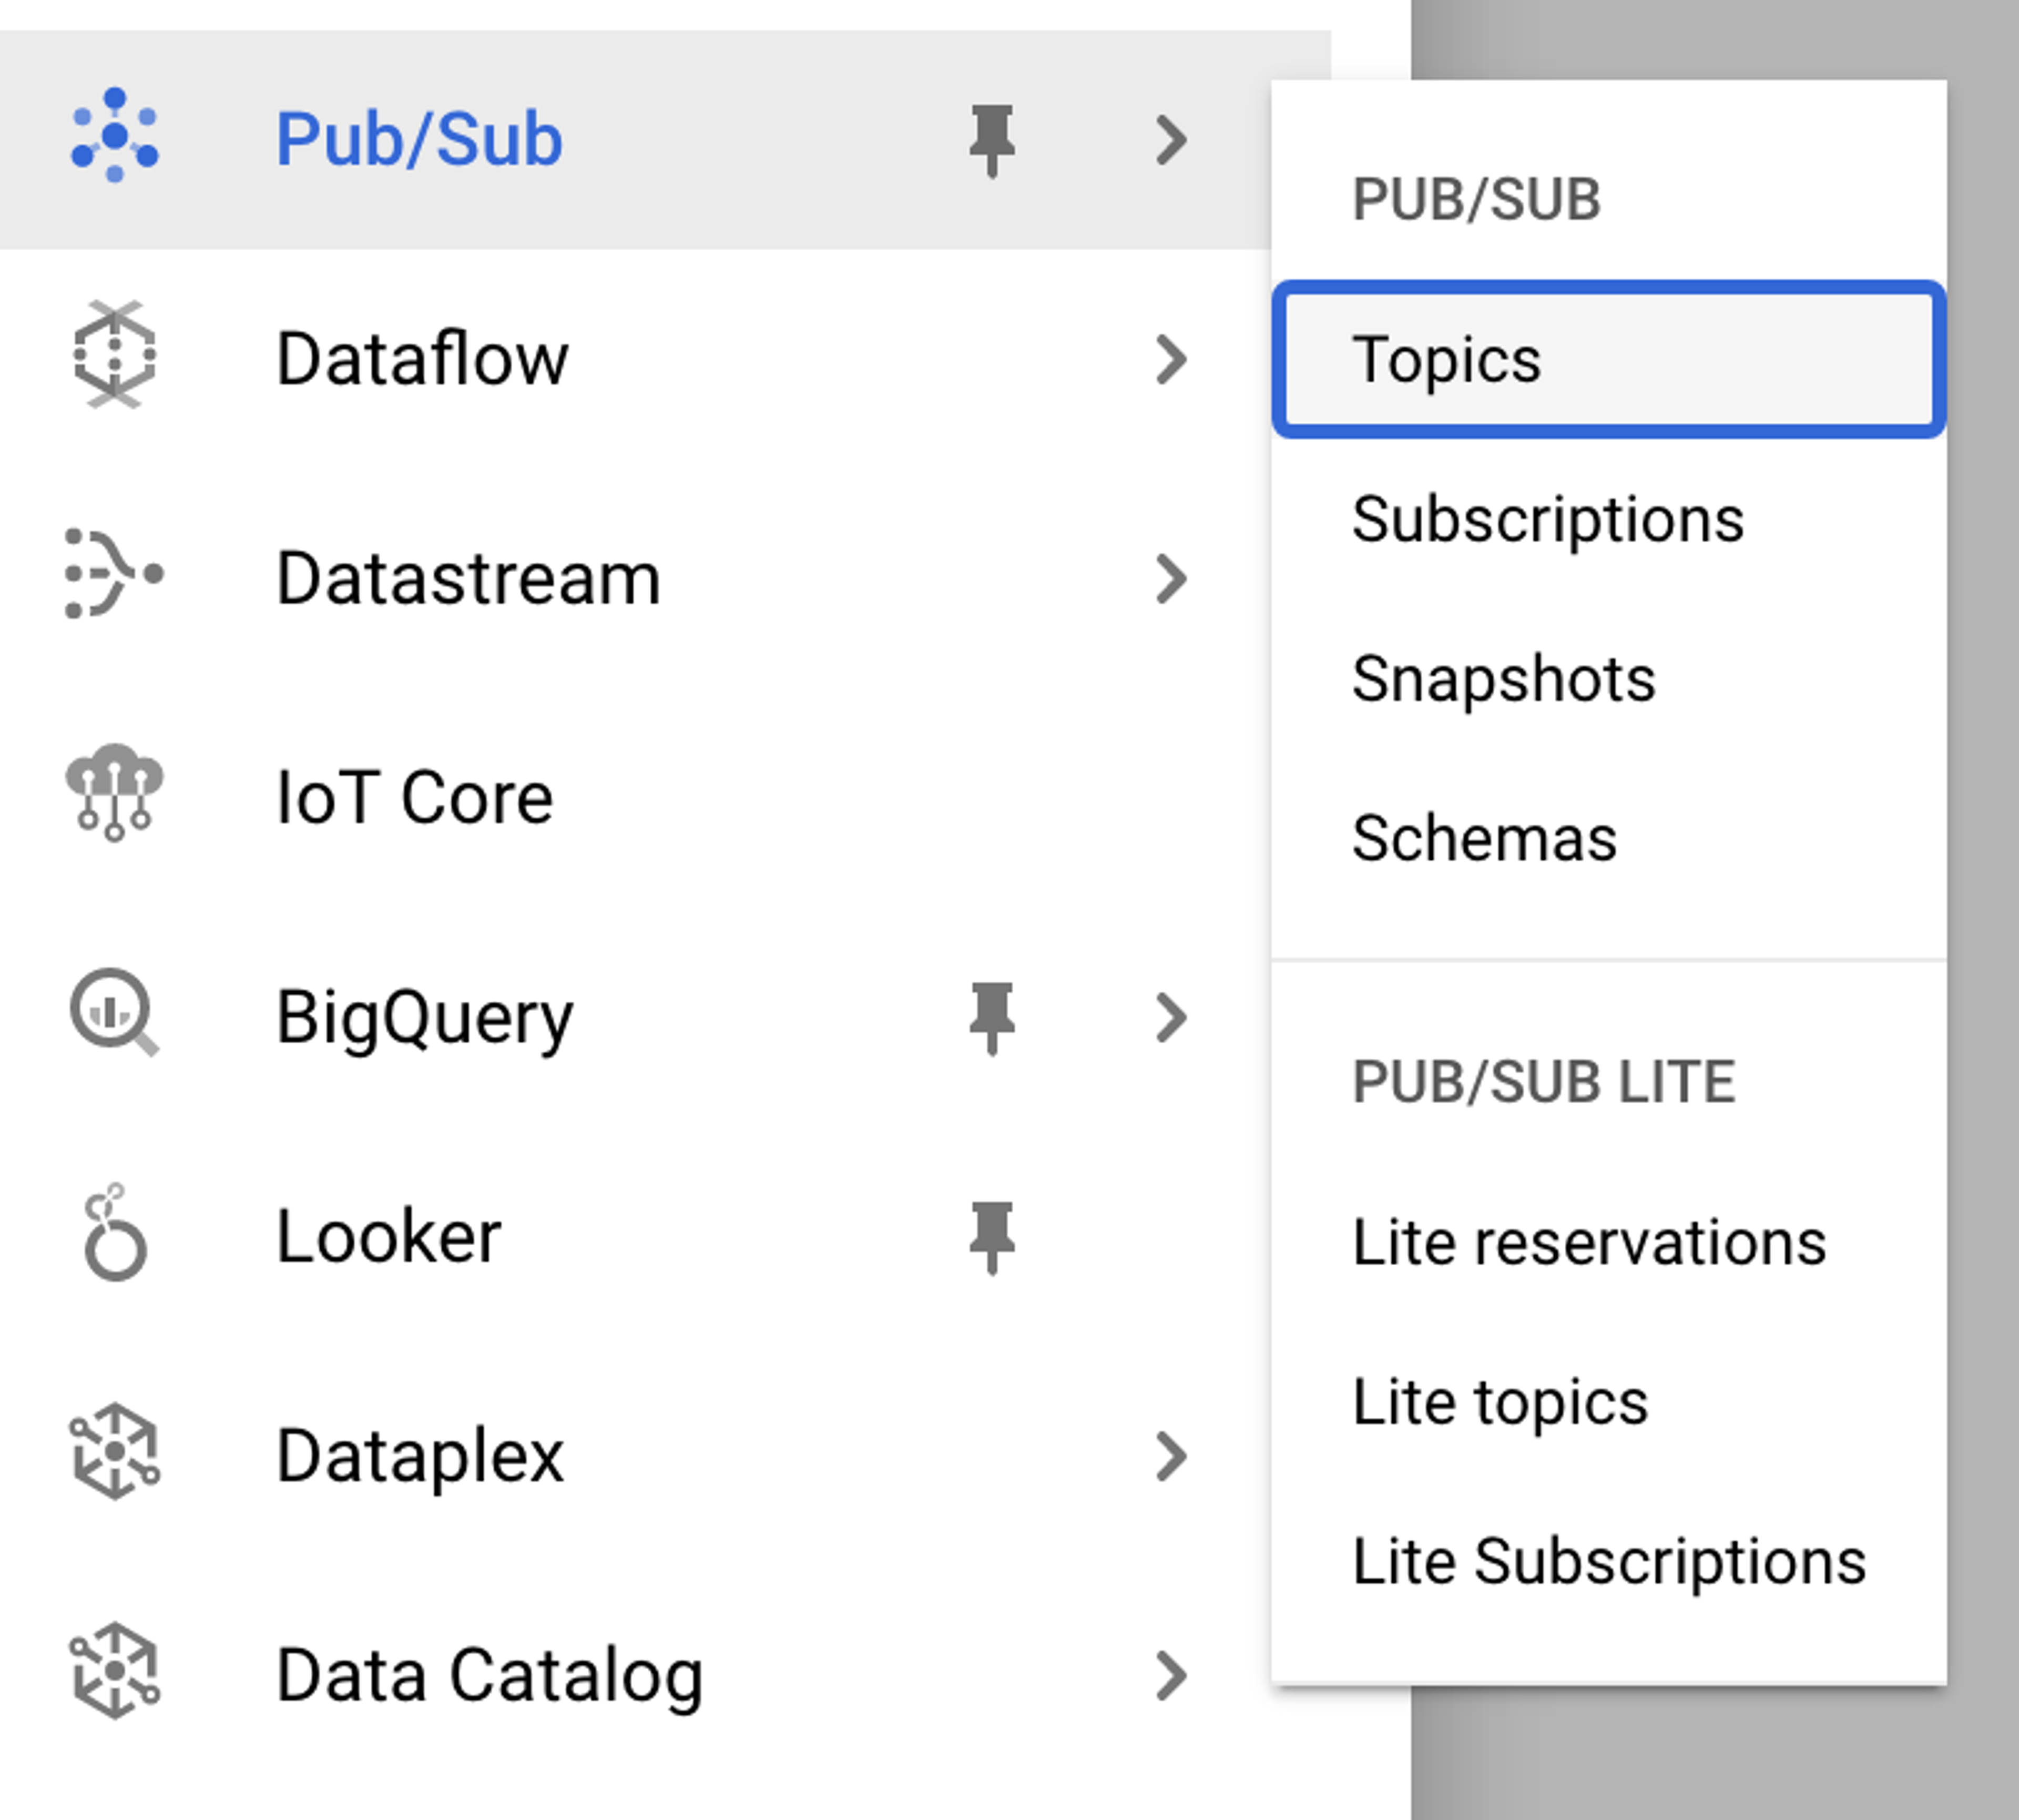 A screenshot showing the location of the Topics submenu item within the Pub/Sub parent menu